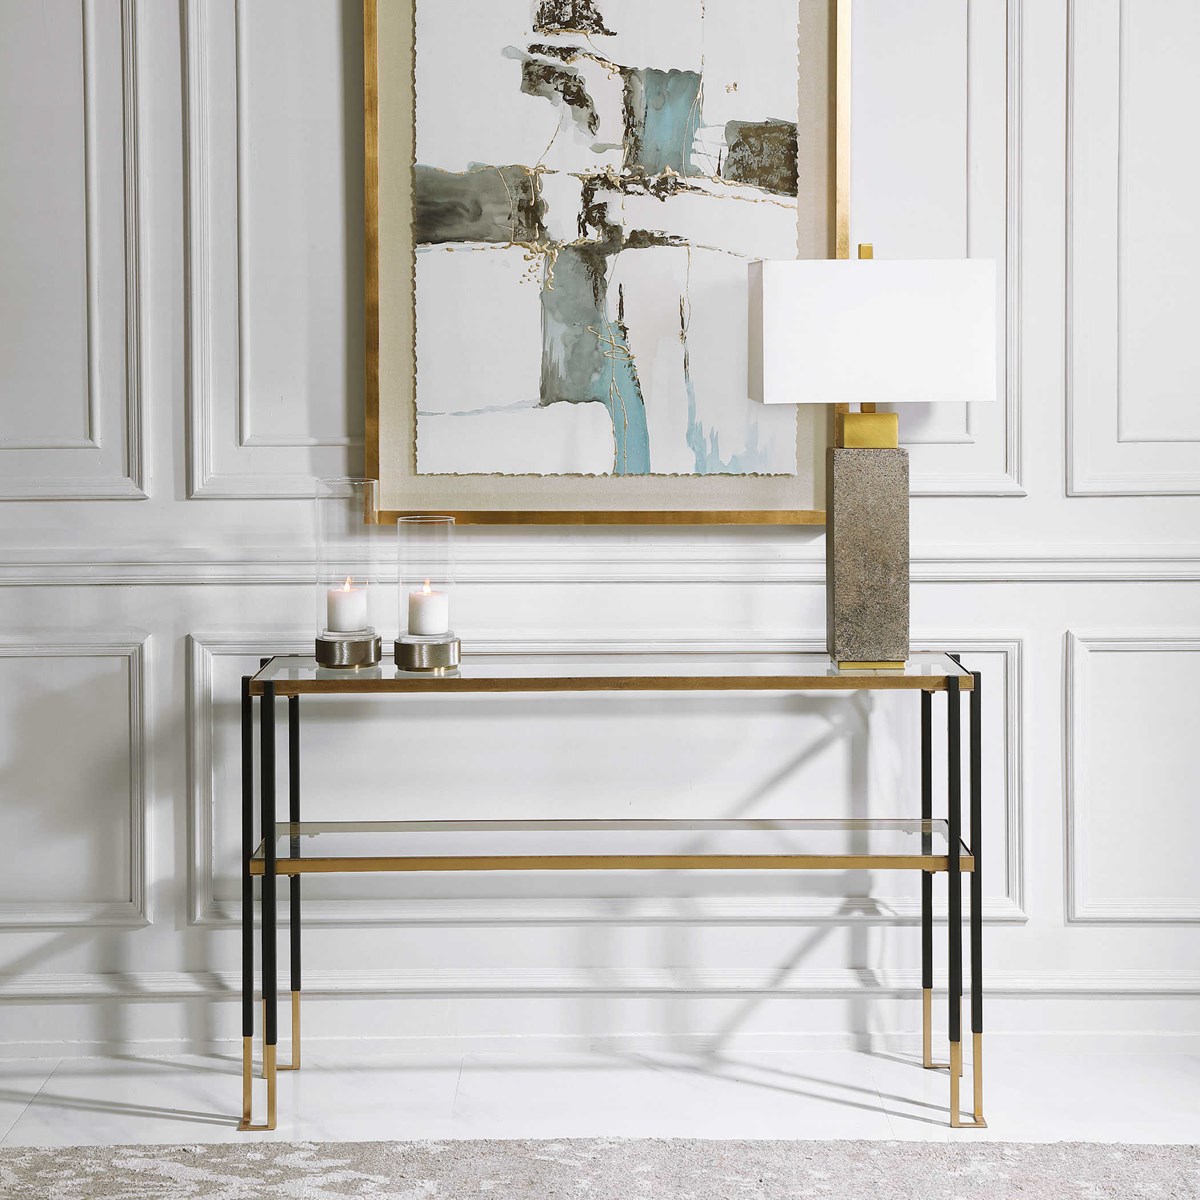 Picture of 212 Main 24978 56.75 x 10 x 17 in. Kentmore Modern Console Table